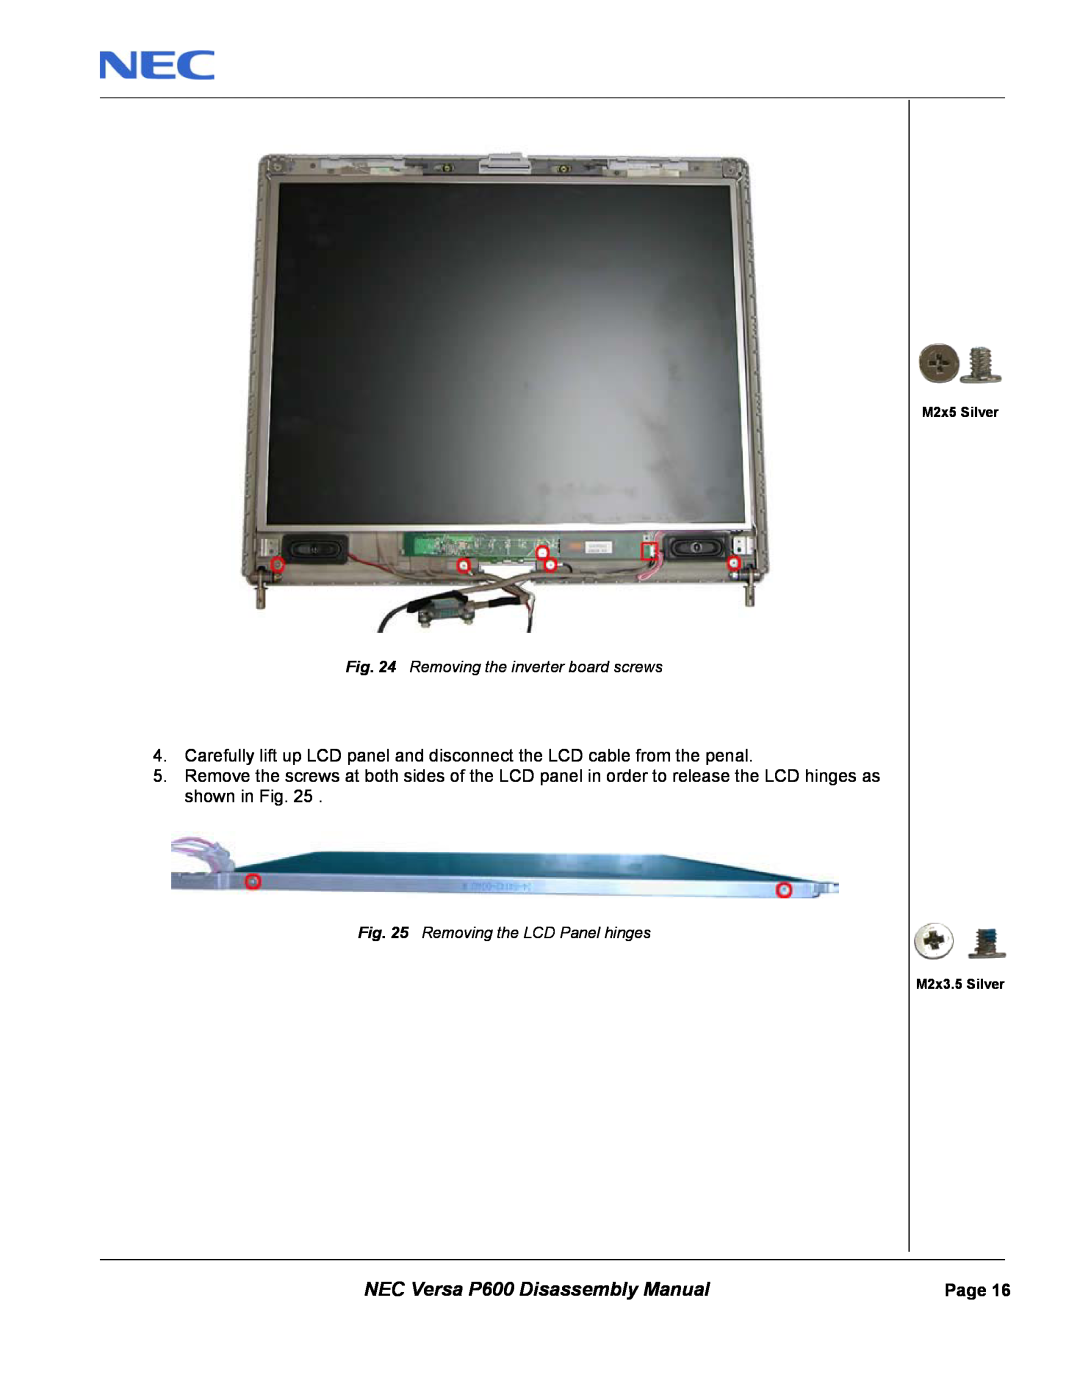 NEC manual NEC Versa P600 Disassembly Manual, Removing the inverter board screws, Removing the LCD Panel hinges 